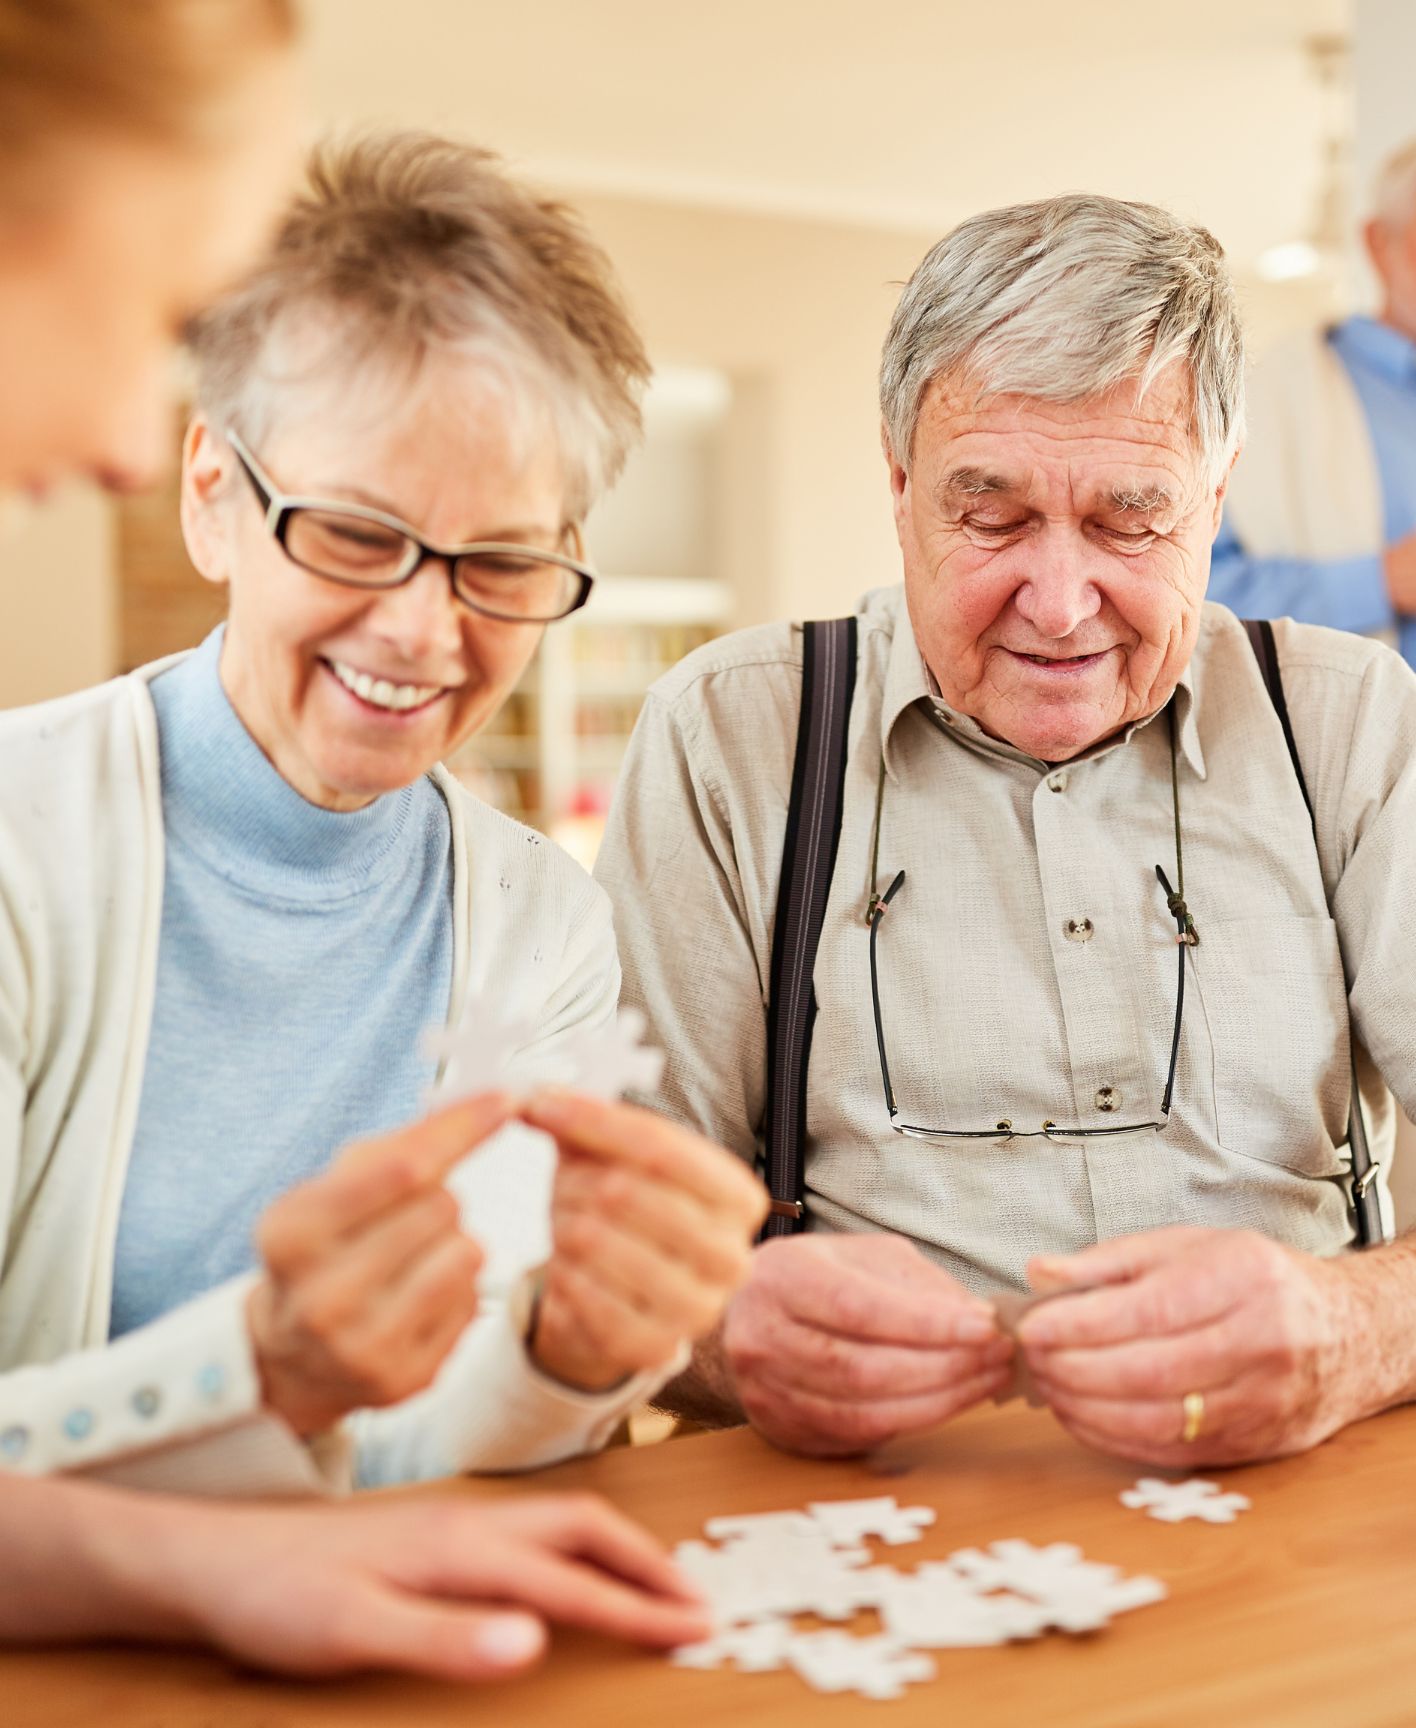 Safe and enjoyable activities for Alzheimer’s patients at home